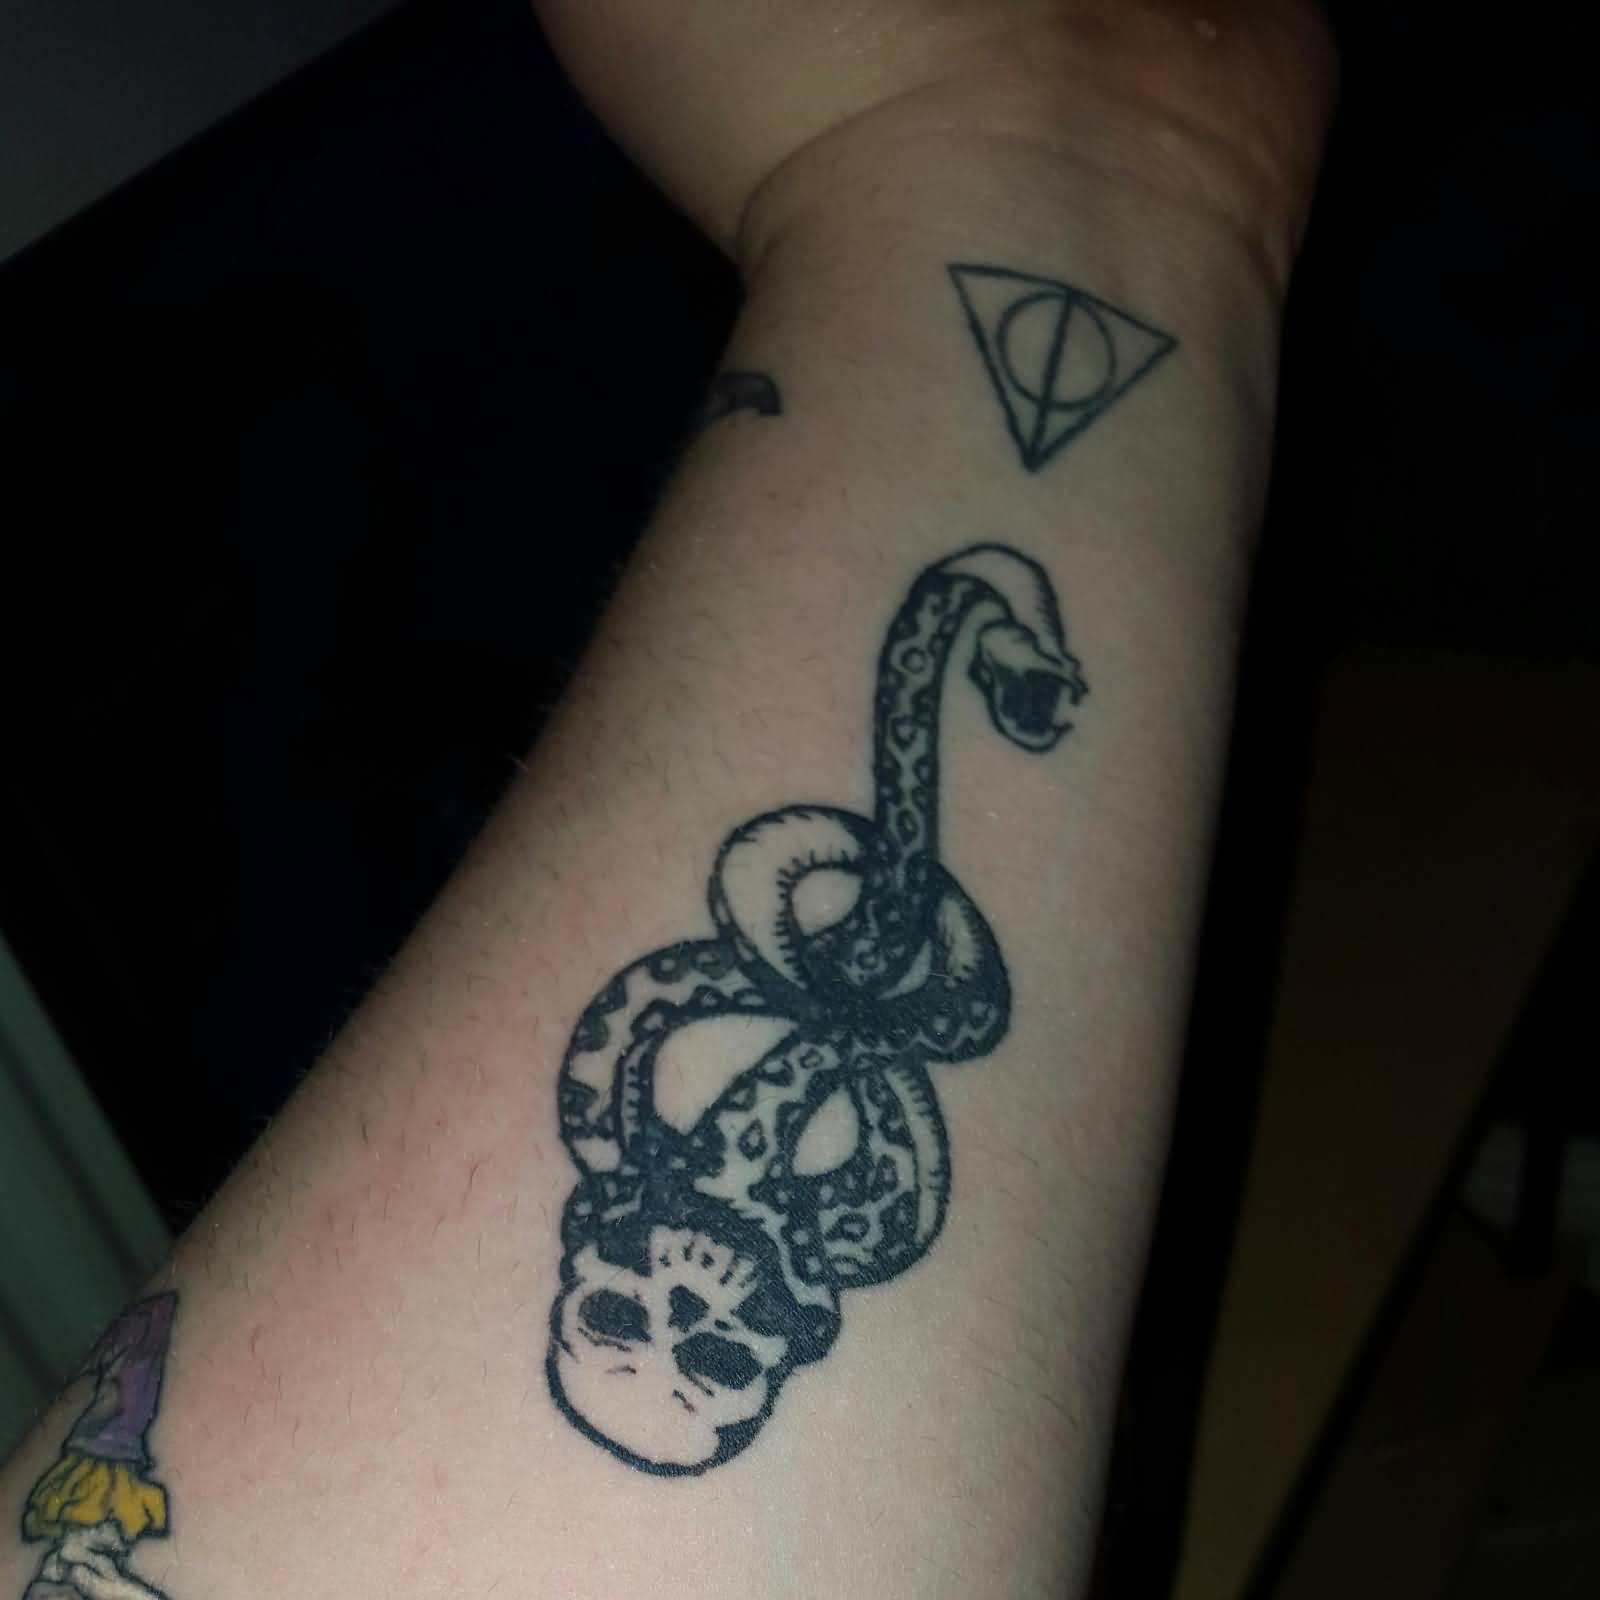 Nice Voldemort Symbol With Deathly Hallows Tattoo On Forearm